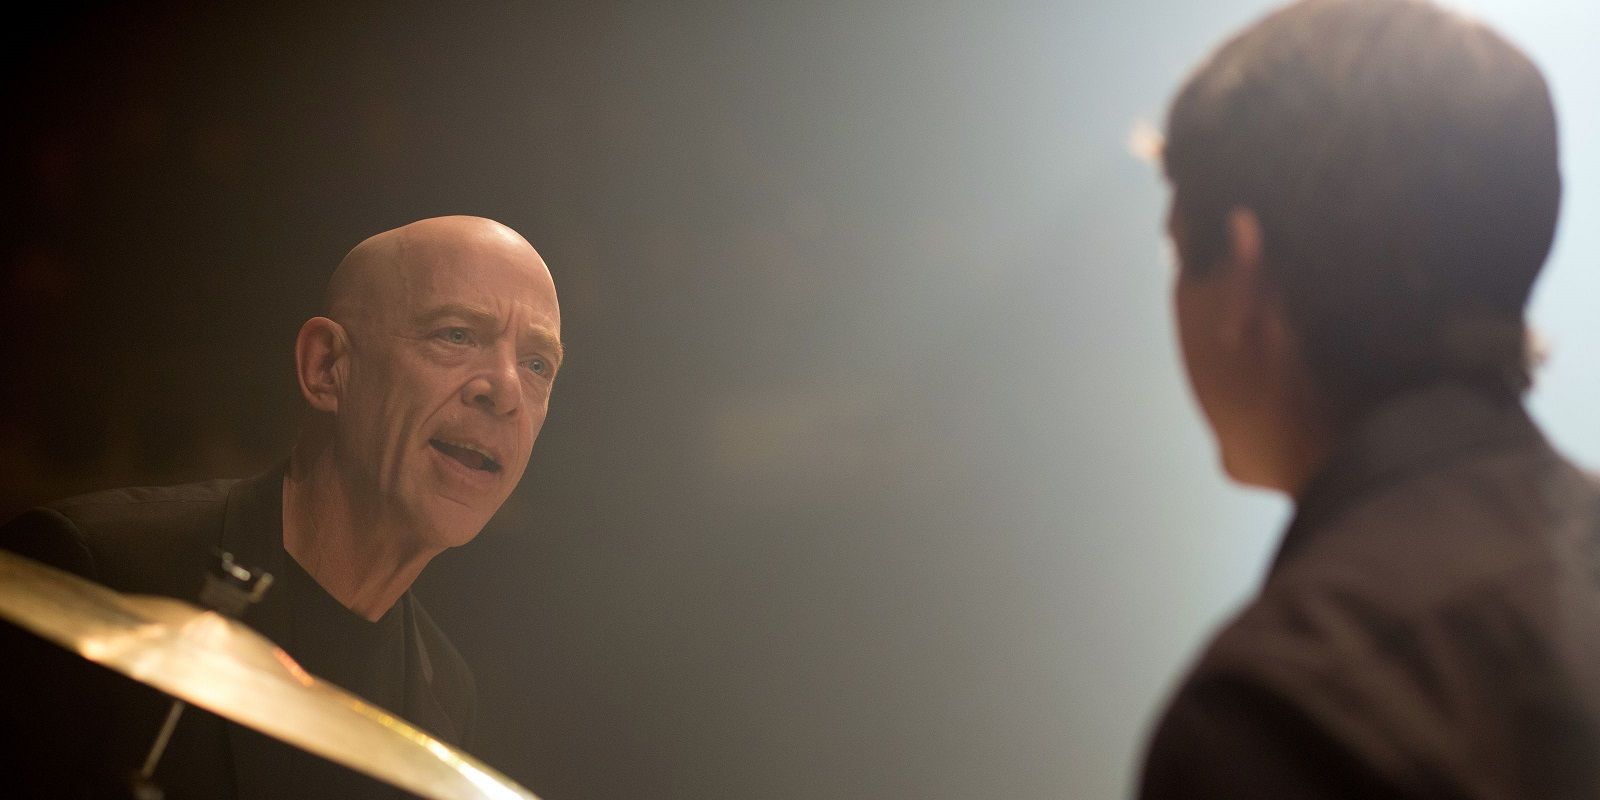 Fletcher talking to Andrew at the drum set in Whiplash